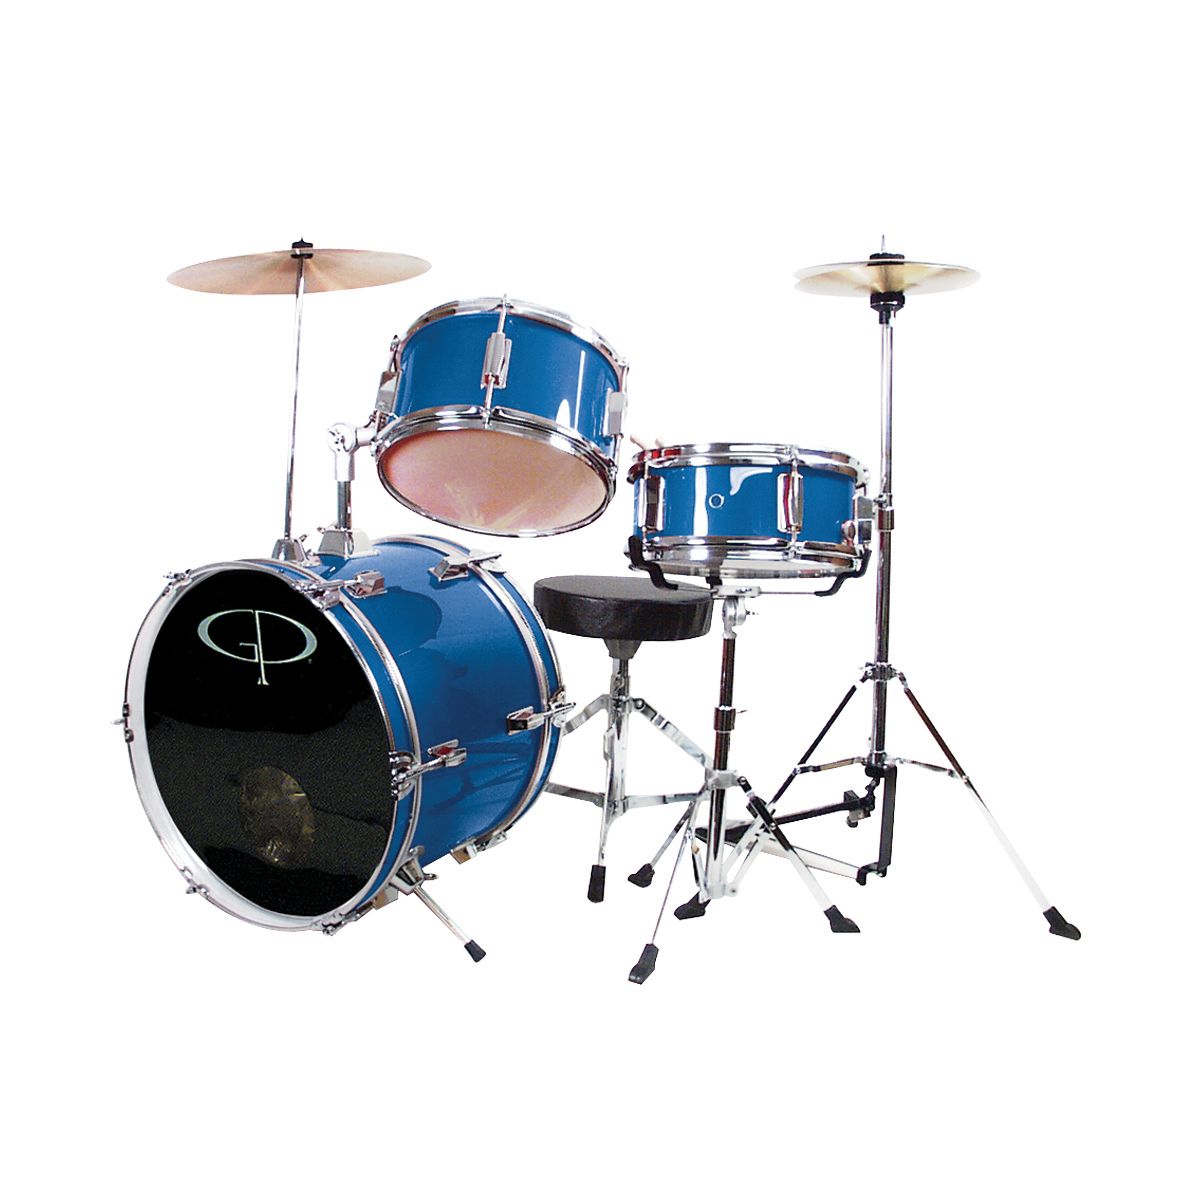 GP50 3-Piece Junior Drum Set With Cymbals and Throne in Metallic Royal Blue